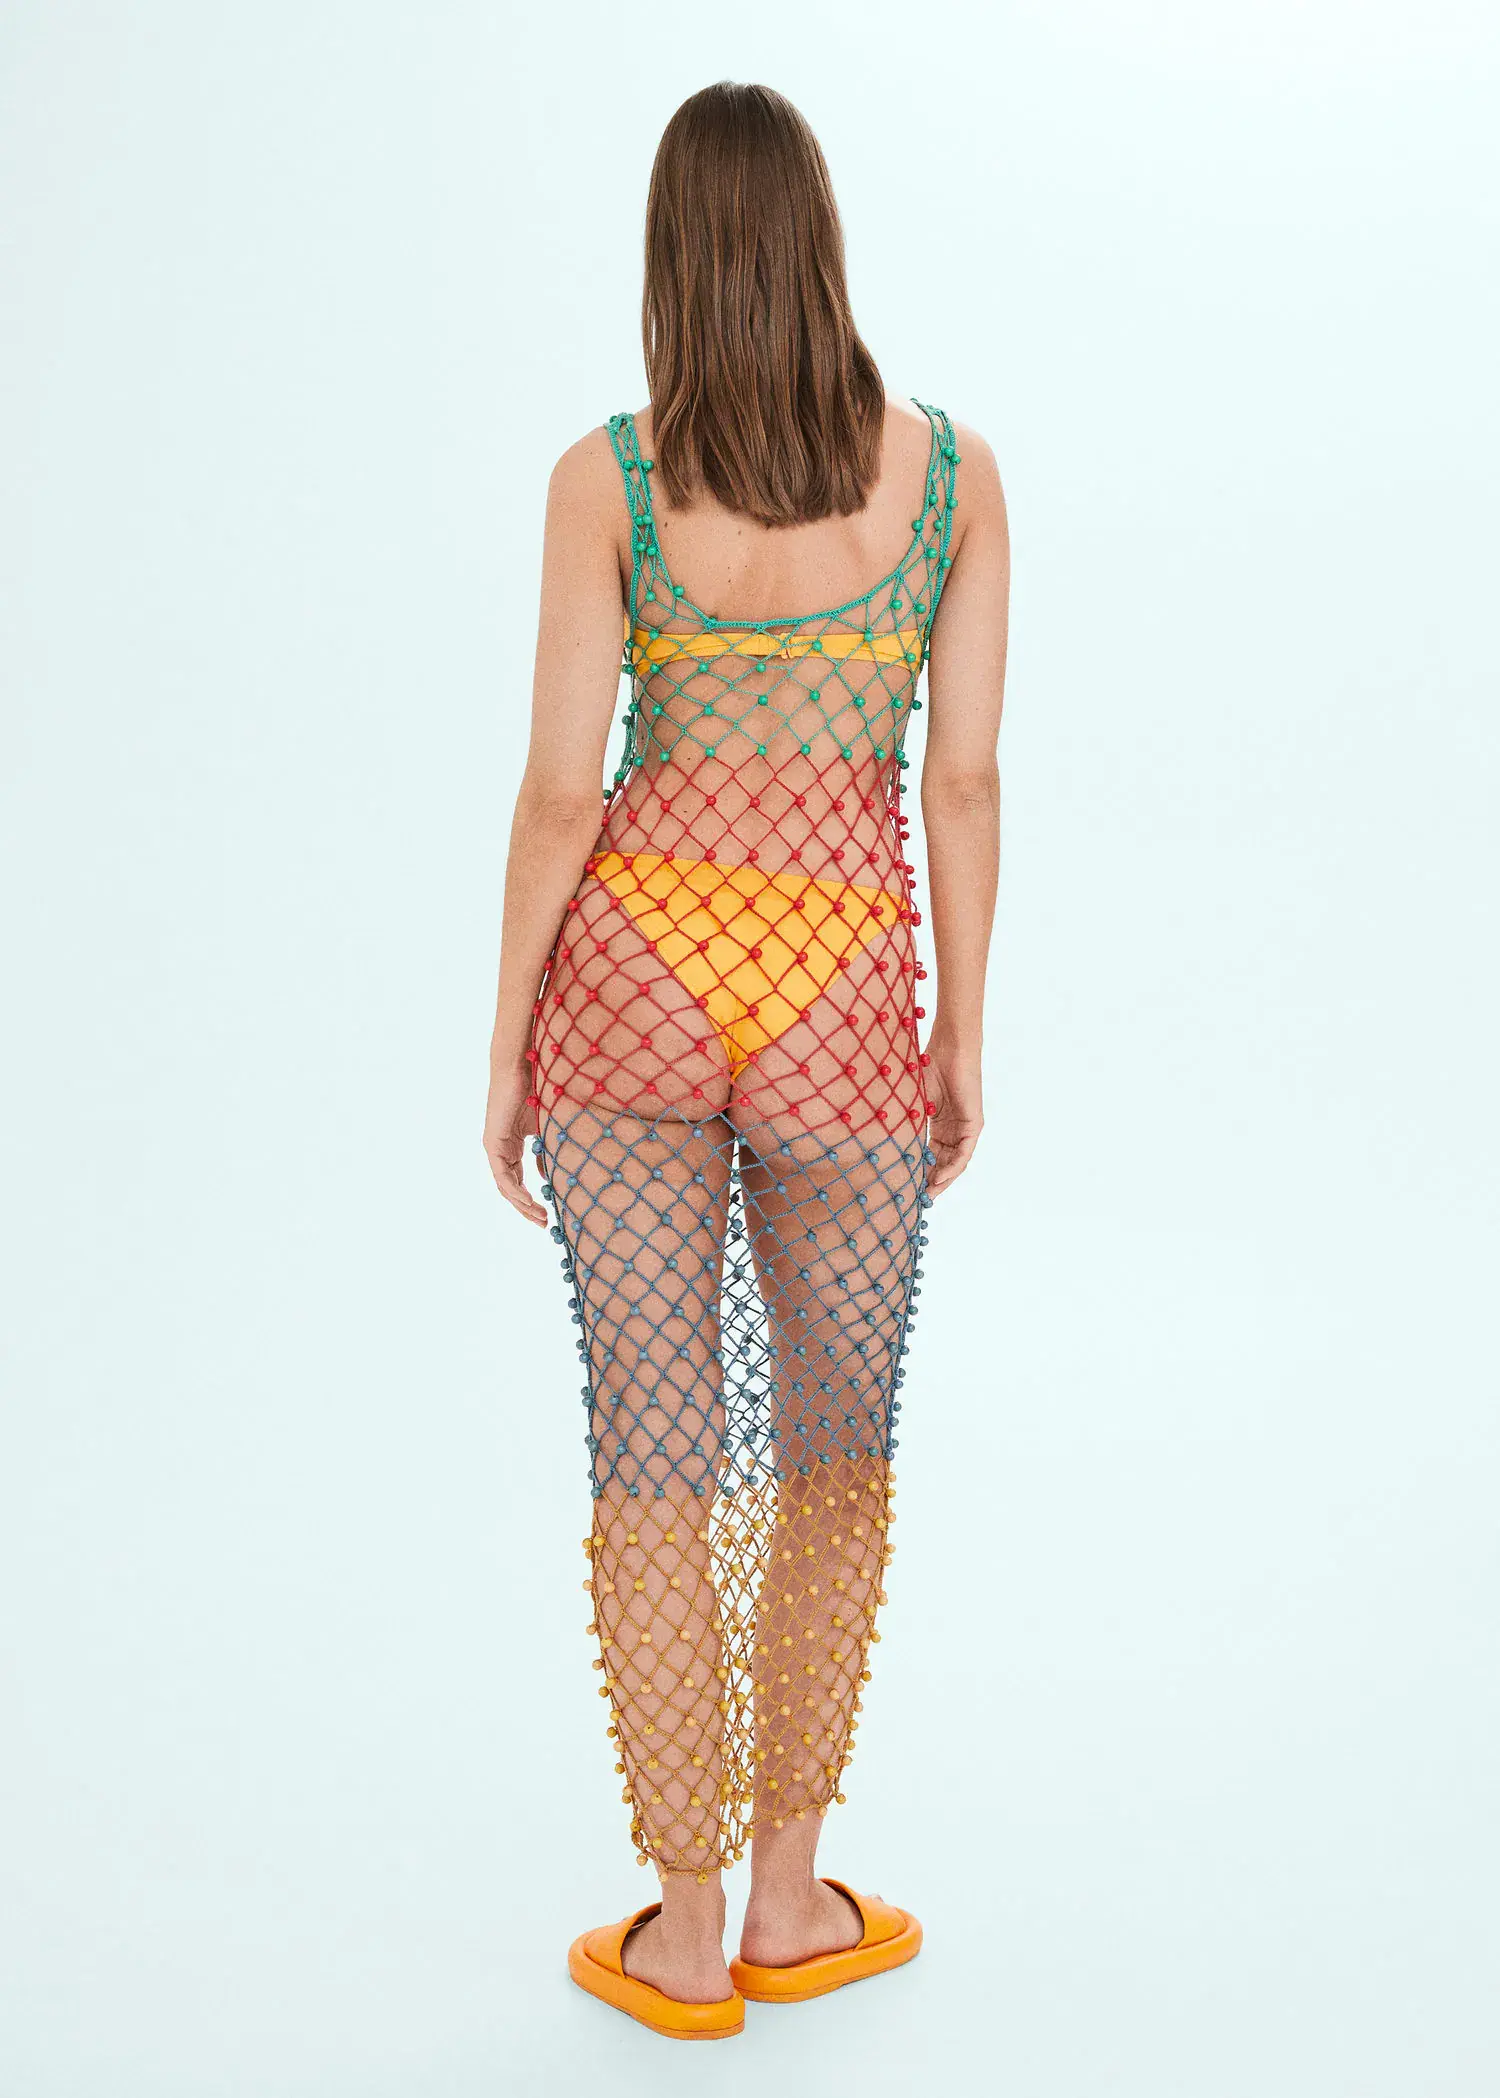 Mango Multi-colored net dress with beads. a woman wearing a colorful fishnet outfit. 